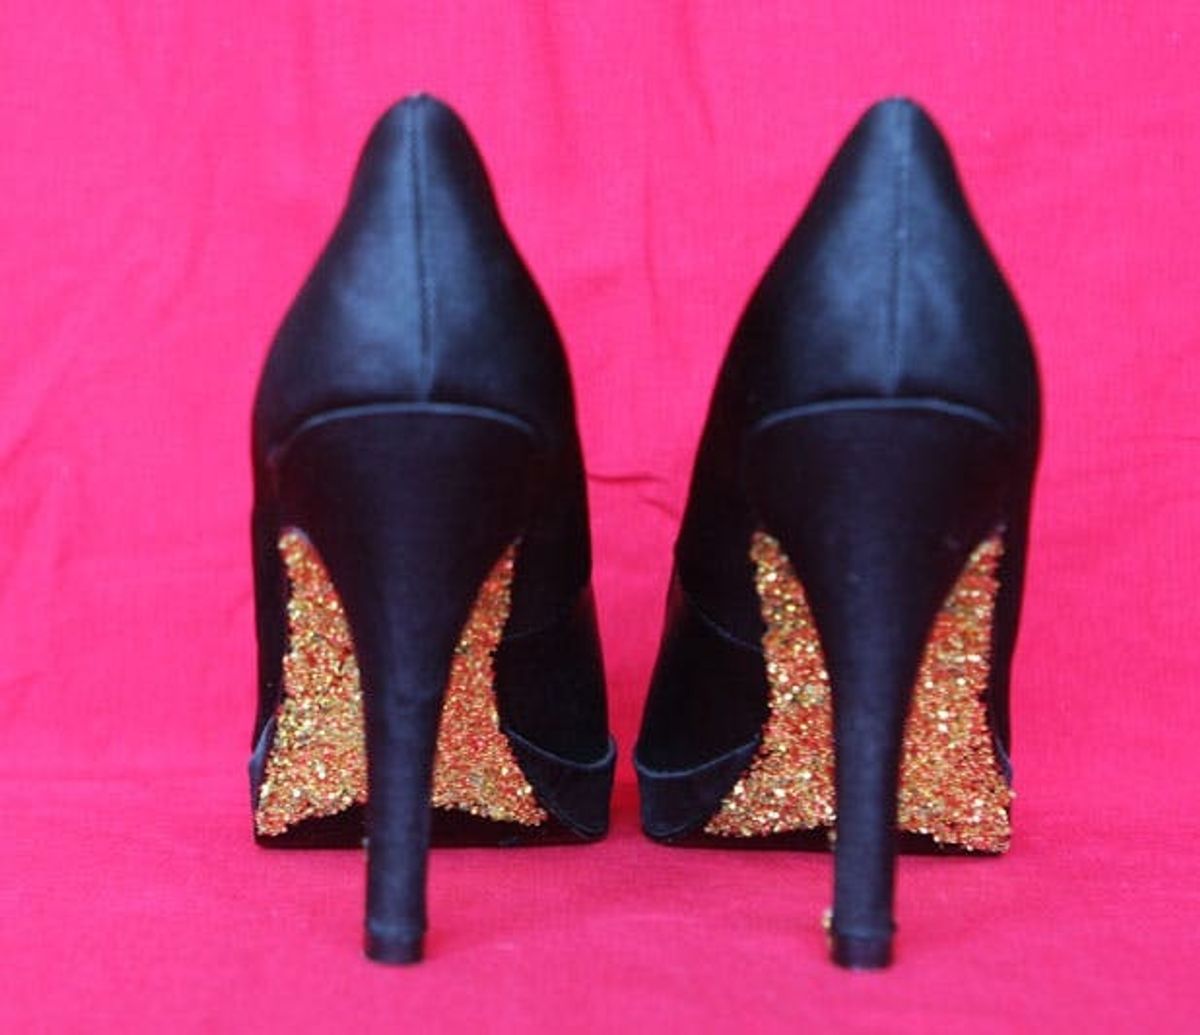 DIY Glitter Heels: Add Some Sparkle to Your Step